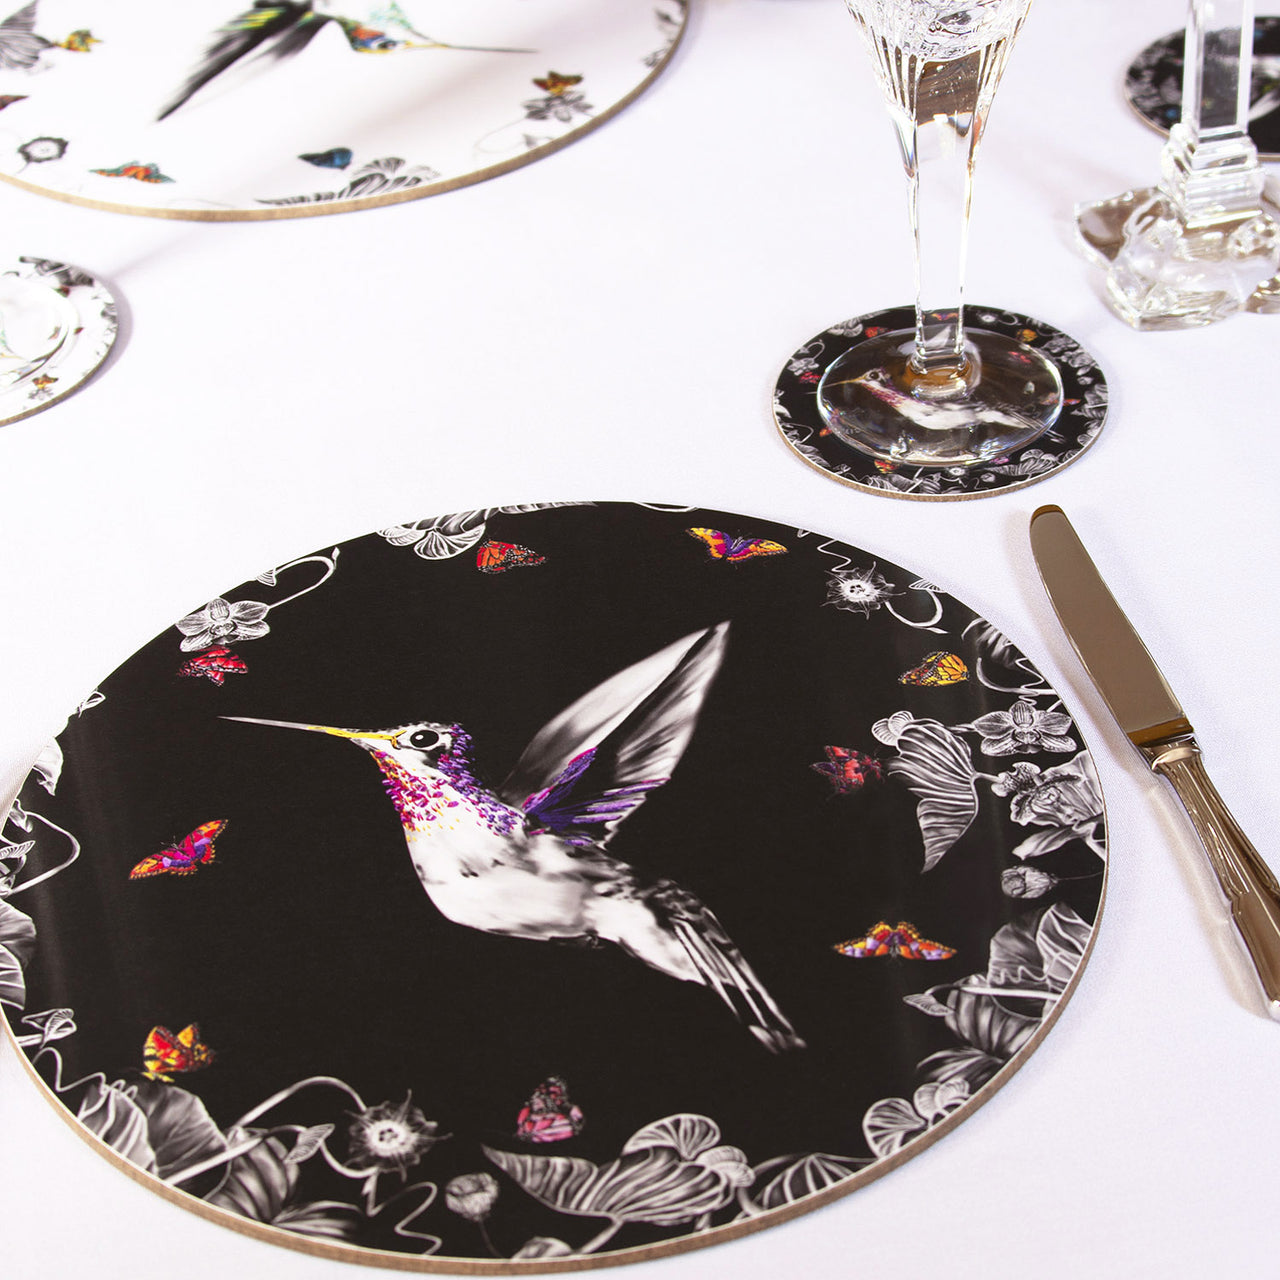 Black hummingbird placemat on table